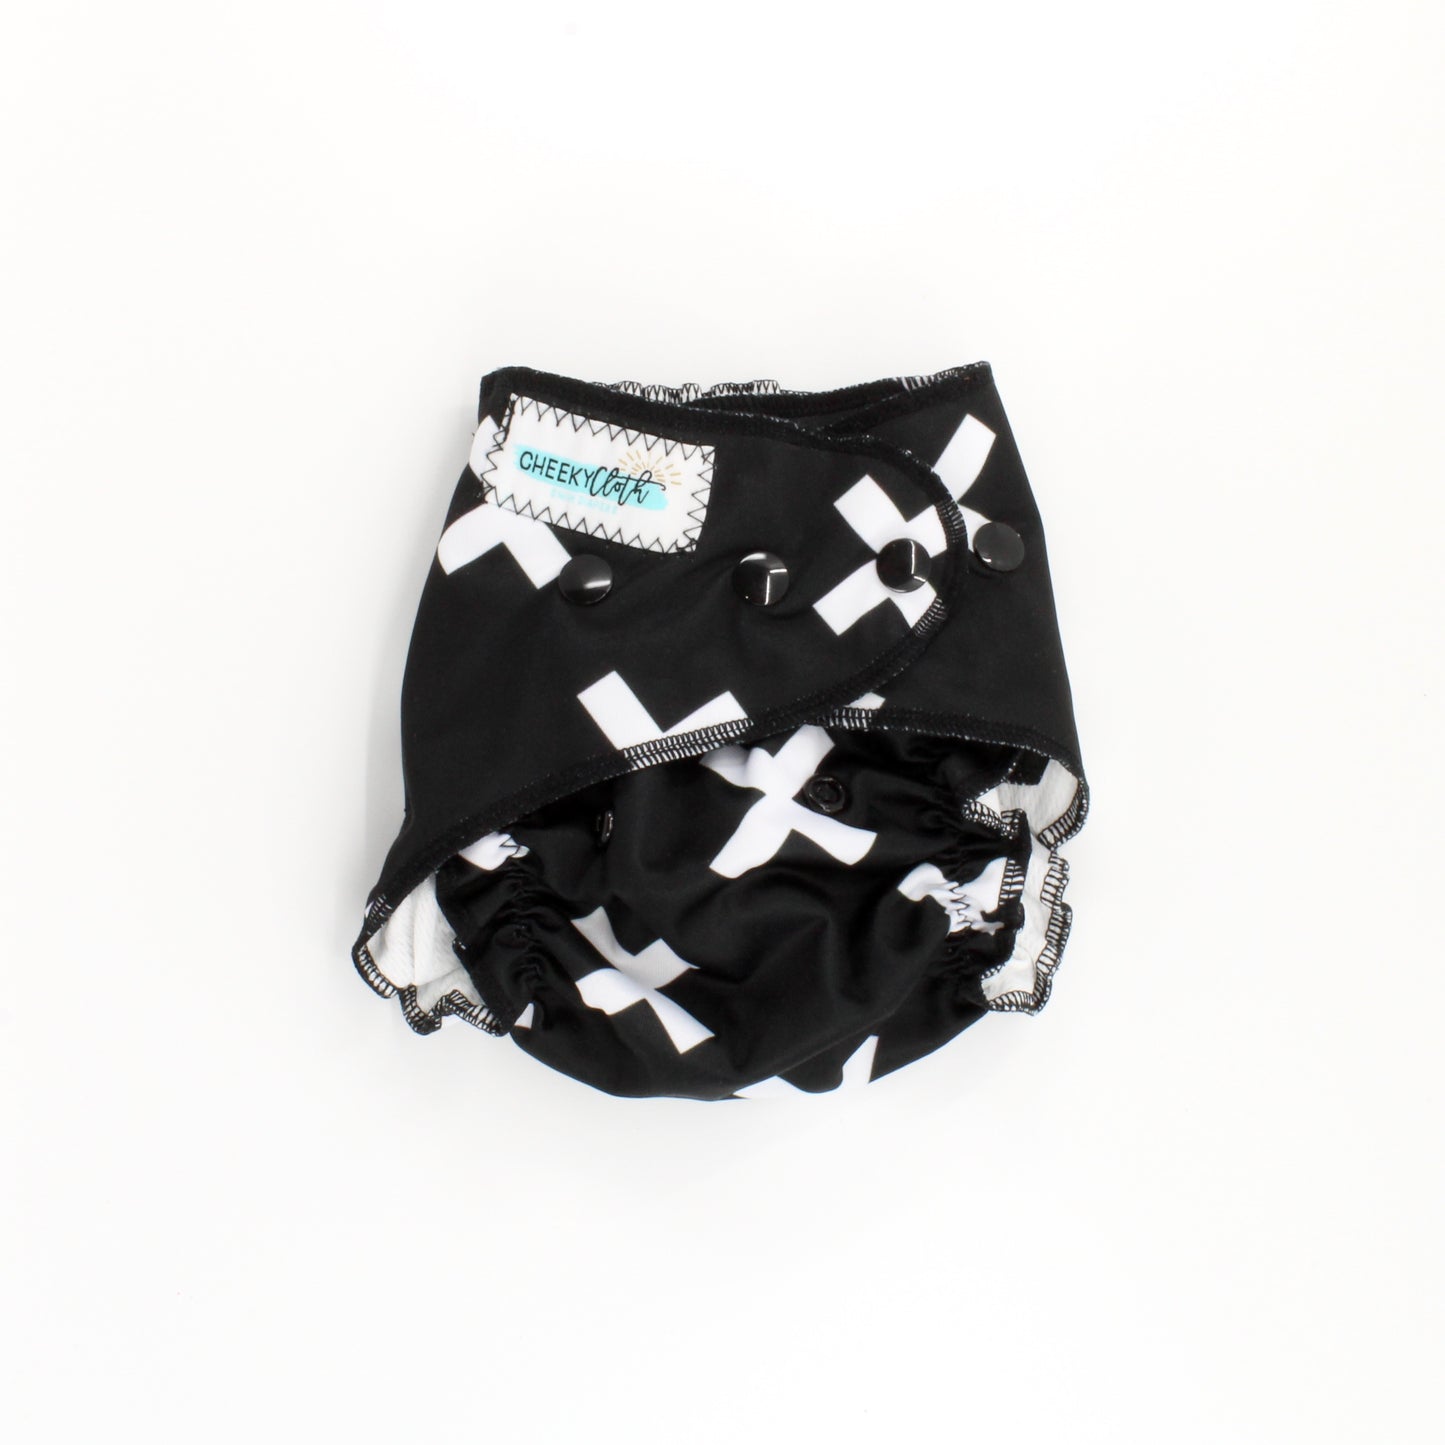 Cheeky Cloth One Size Reusable Swim Diaper "Black with white x"